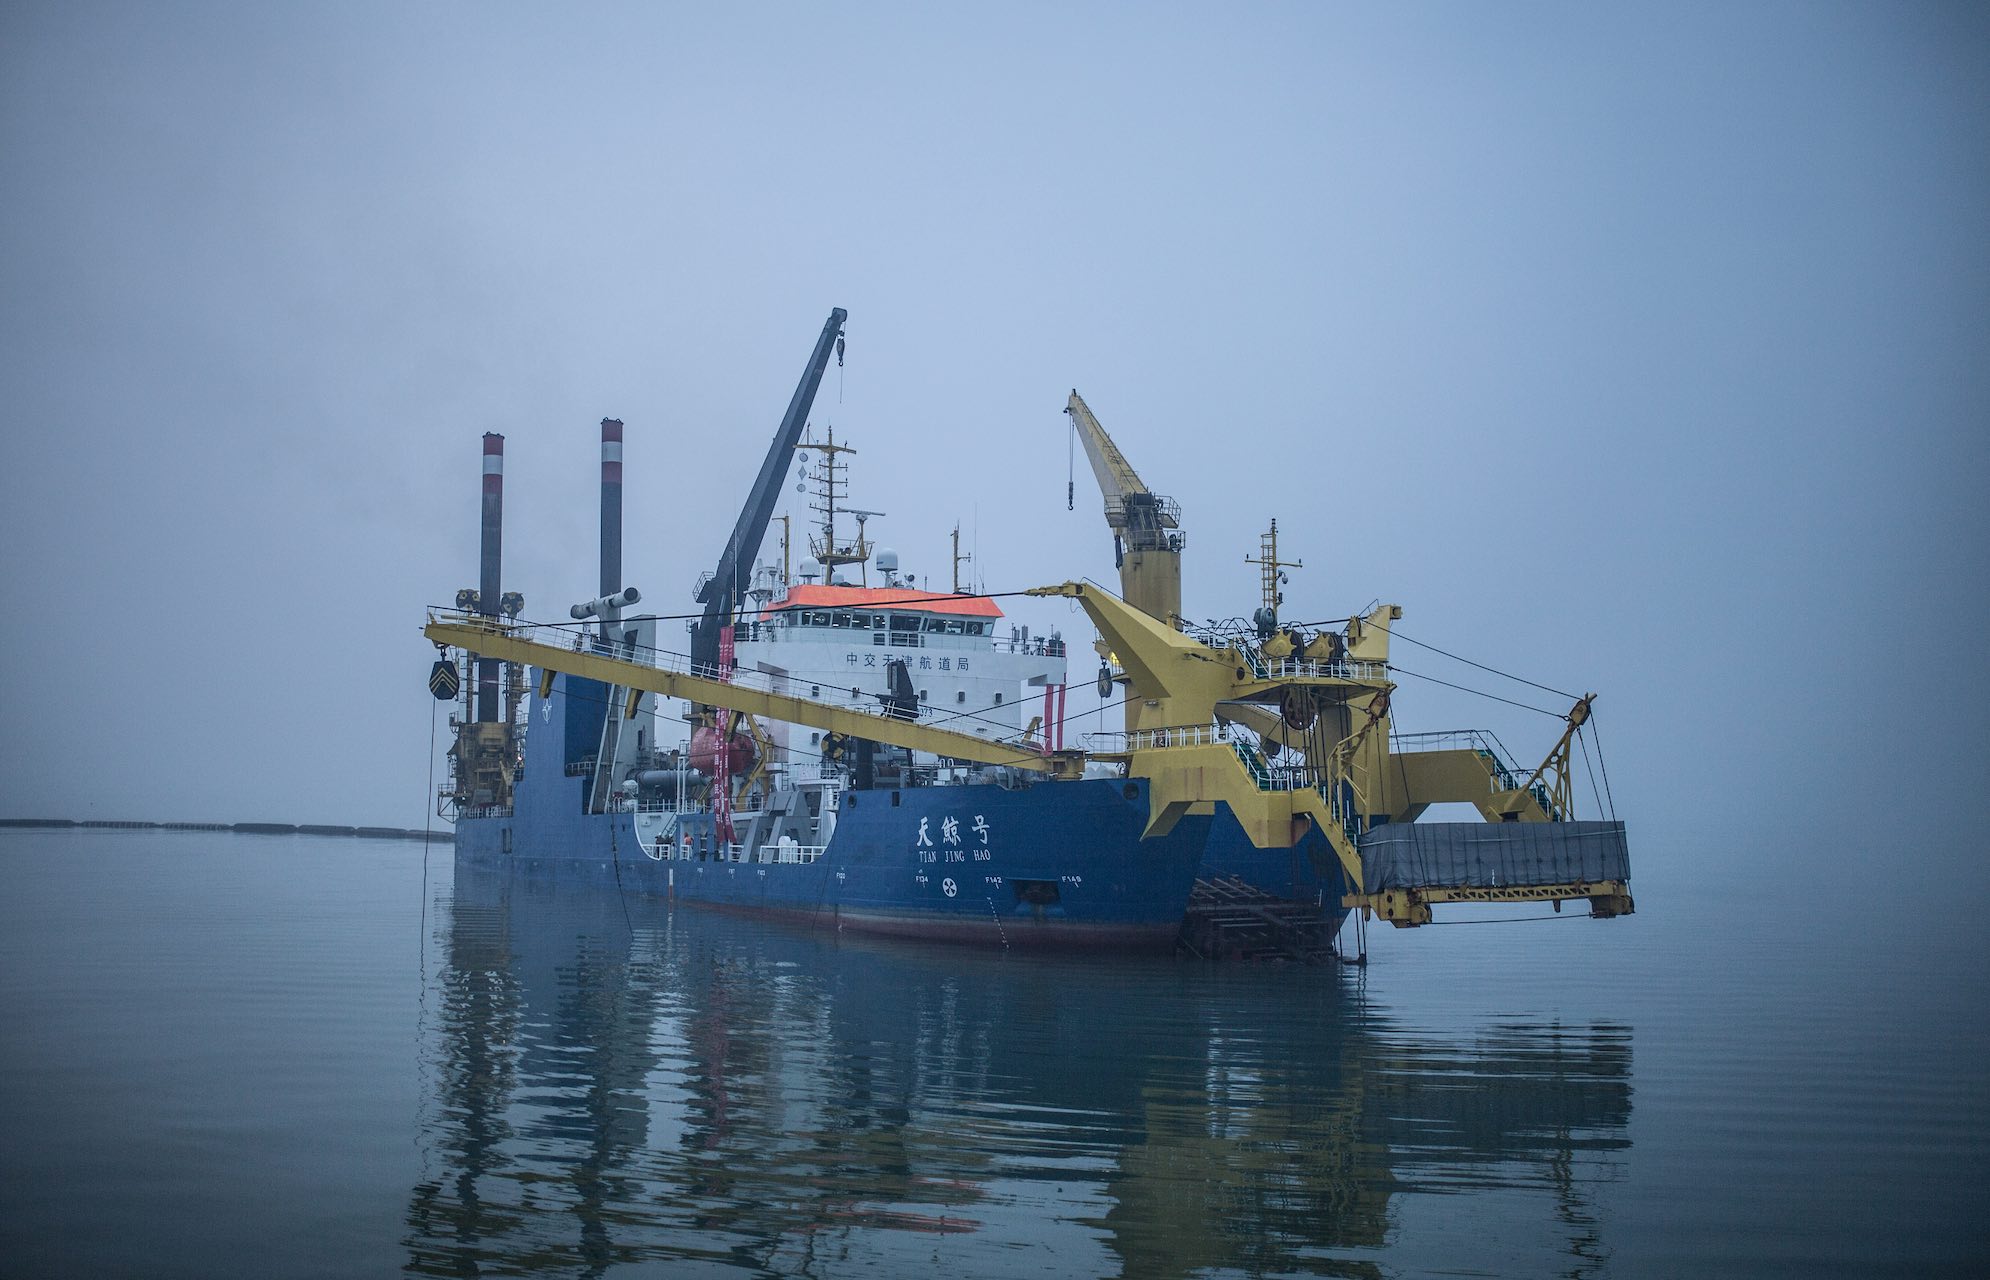 Crew members of Tianjing, or Sky Whale, a self-propelled cutter-suction dredger, are running the vessel during a task off the coast of Lianyungang, East China’s Jiangsu Province on January 14, 2023. Photo: Shan Jie/GT